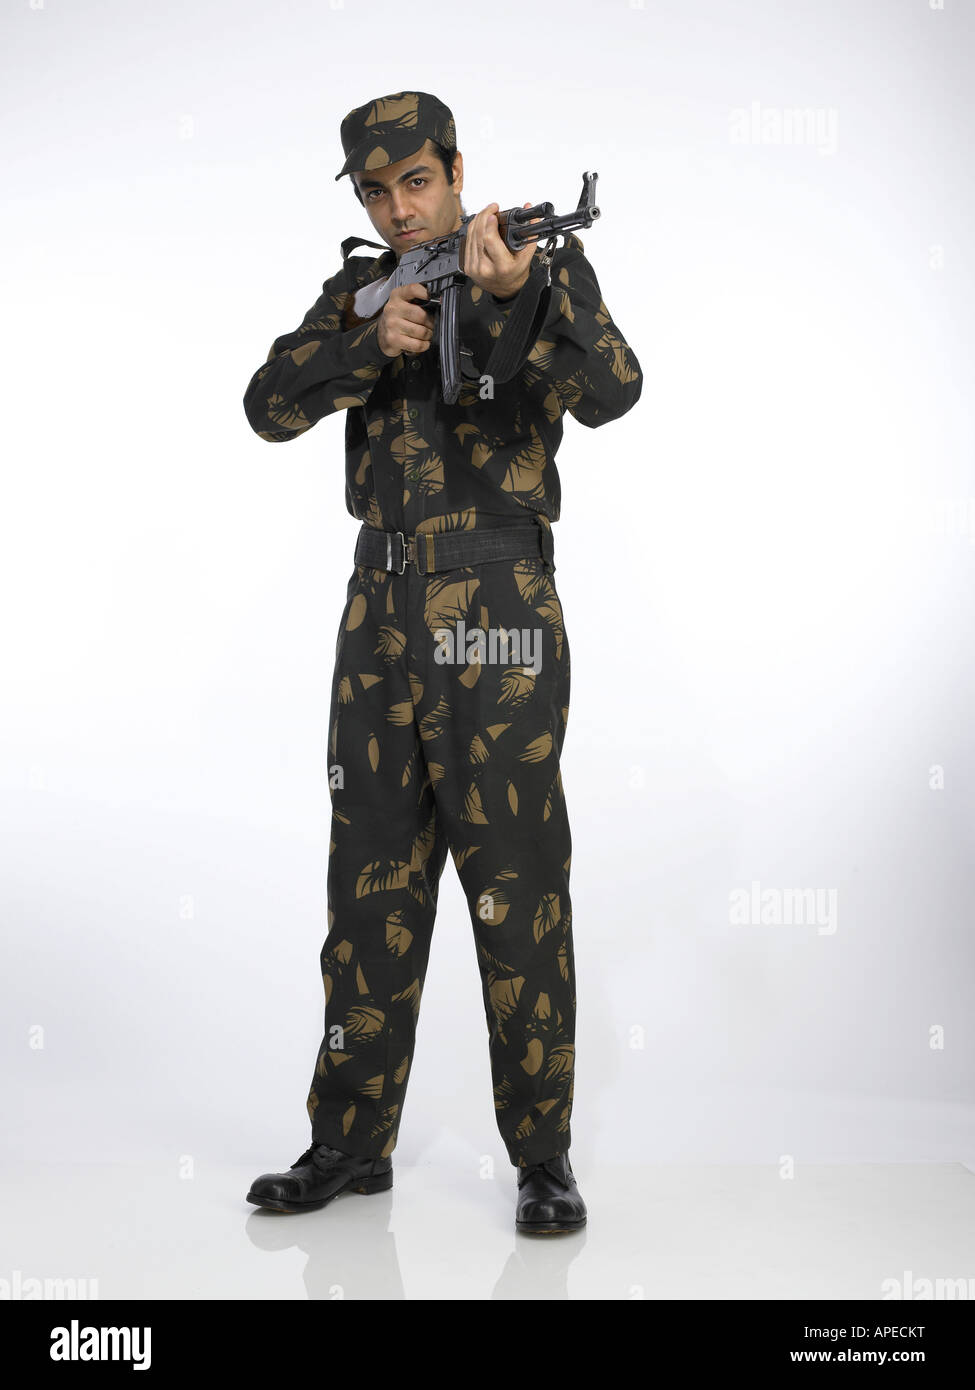 indian-army-soldier-standing-and-pointing-ak-47-gun-APECKT.jpg